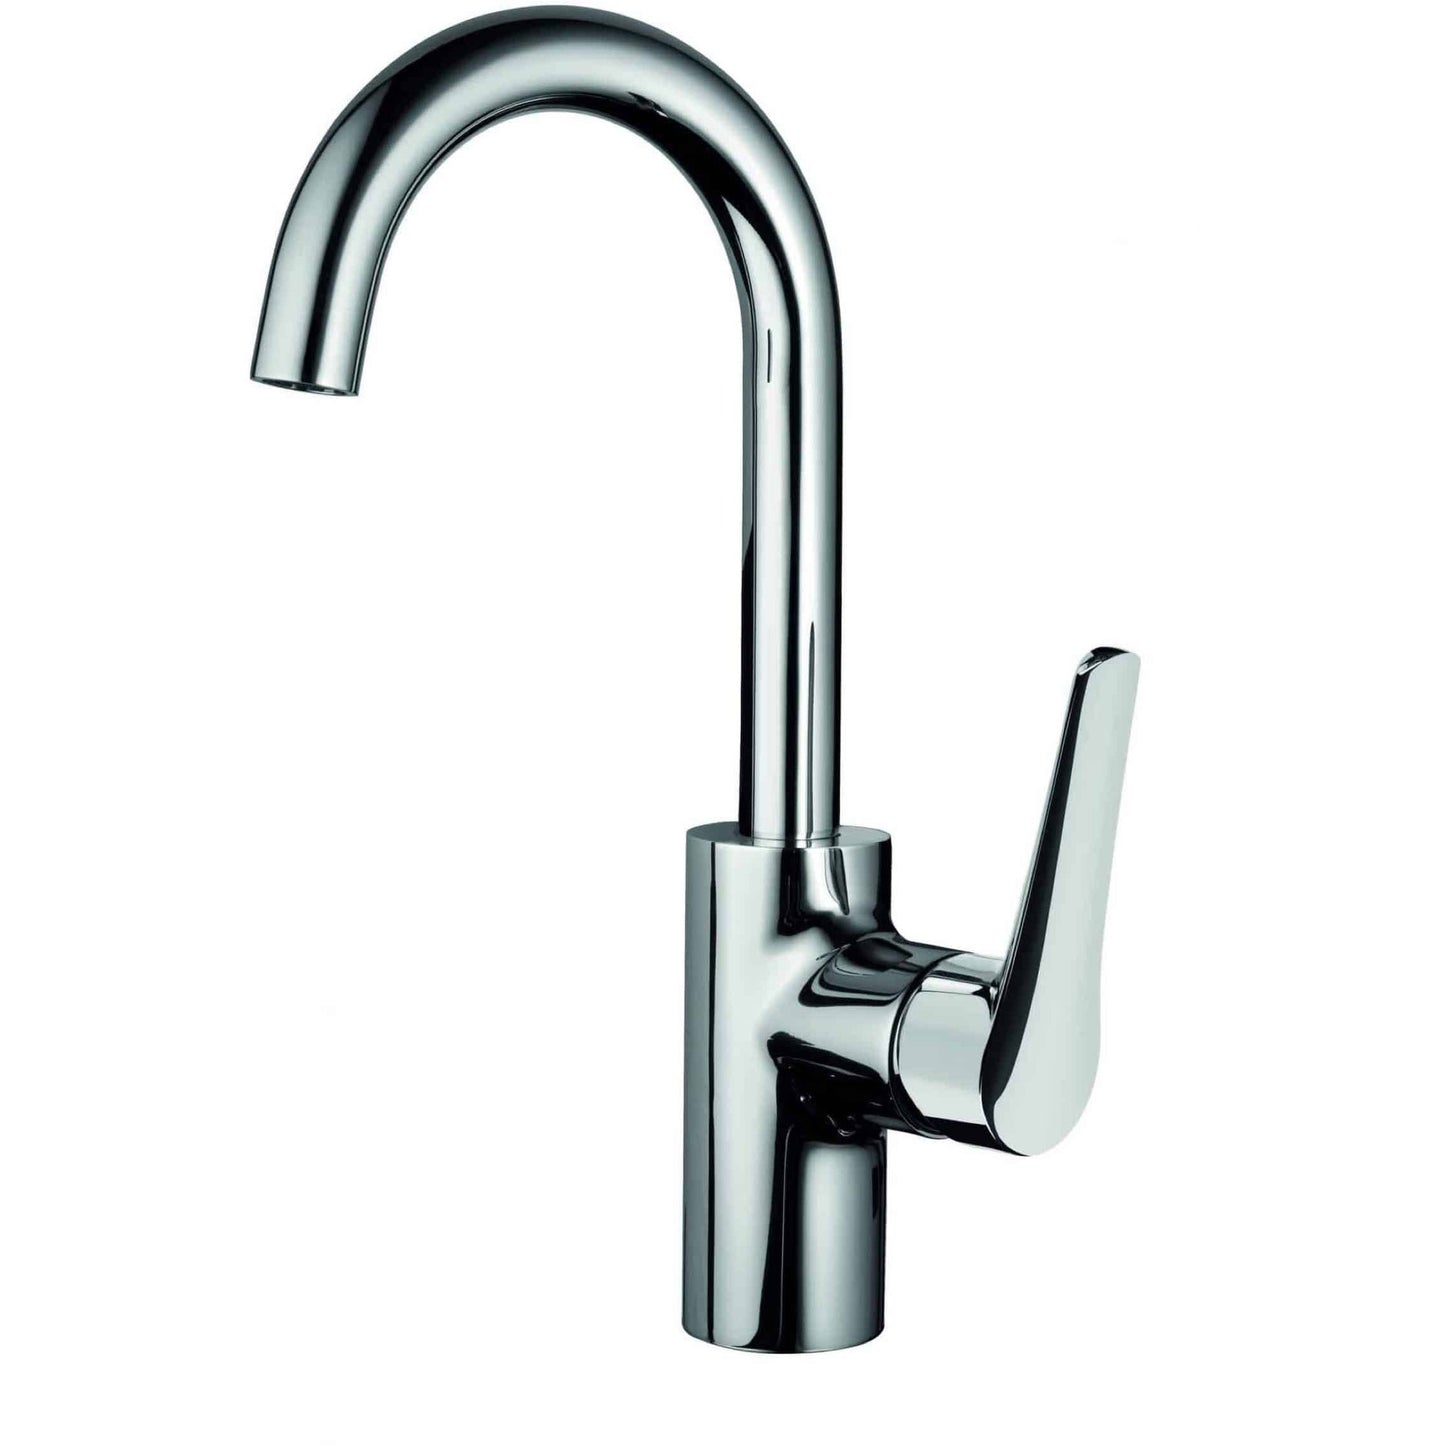 Bar faucet or lavabo faucet for small vanity serie Flap 475339-10